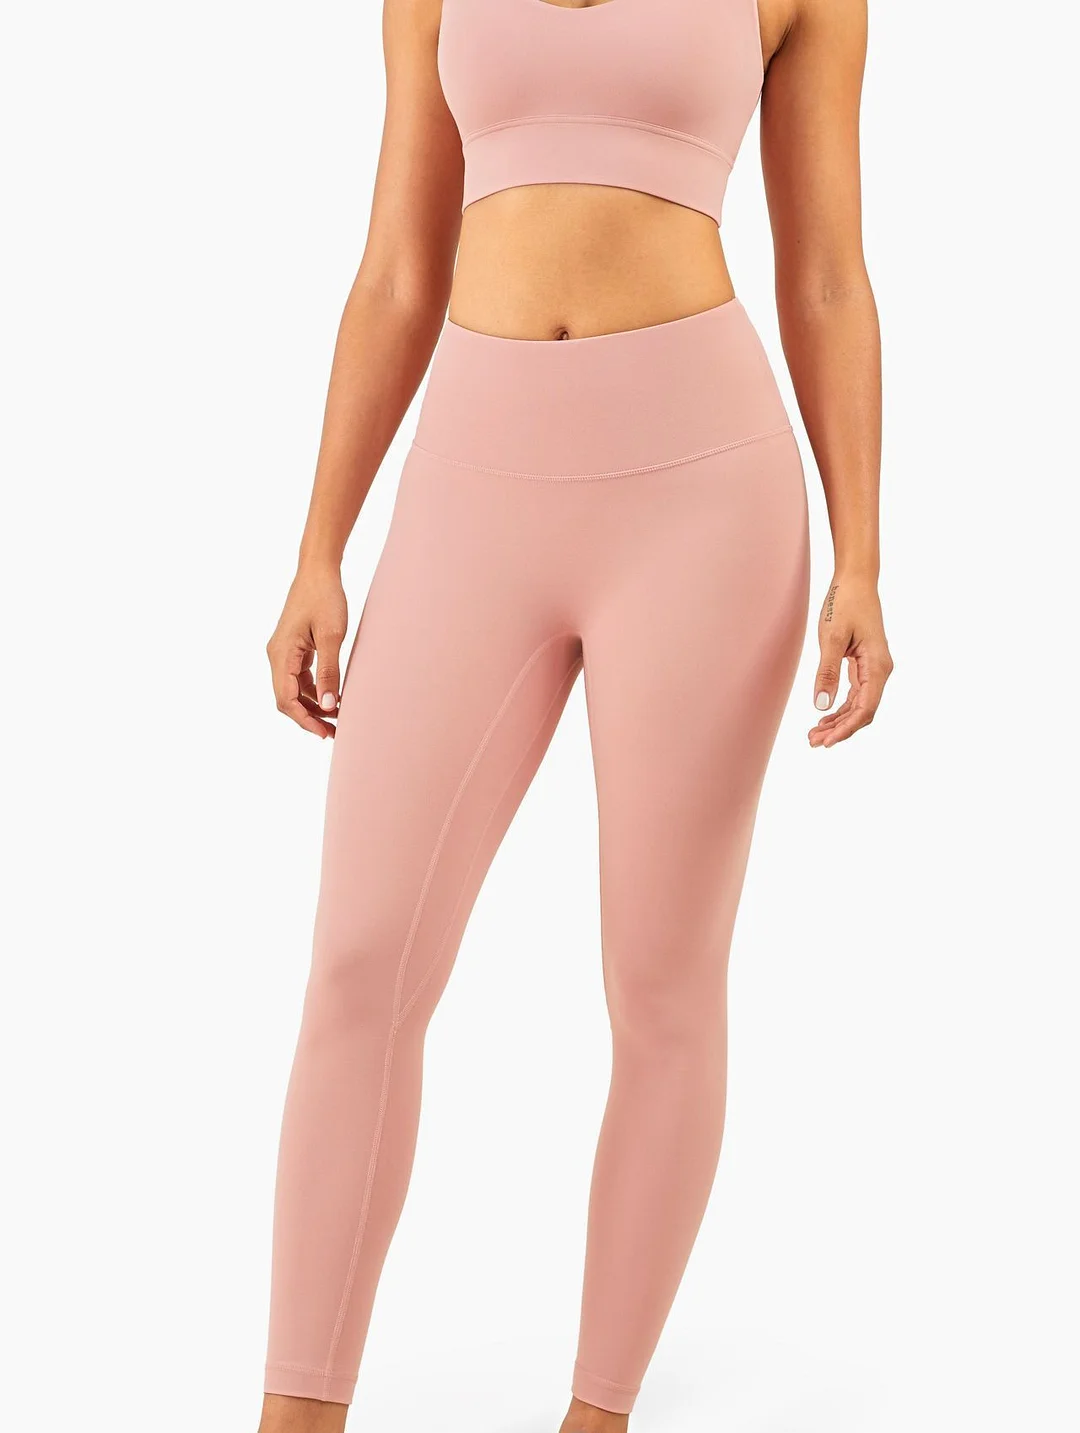 Align™ Super High-Rise Pant 28" Online Only Pink Pastel